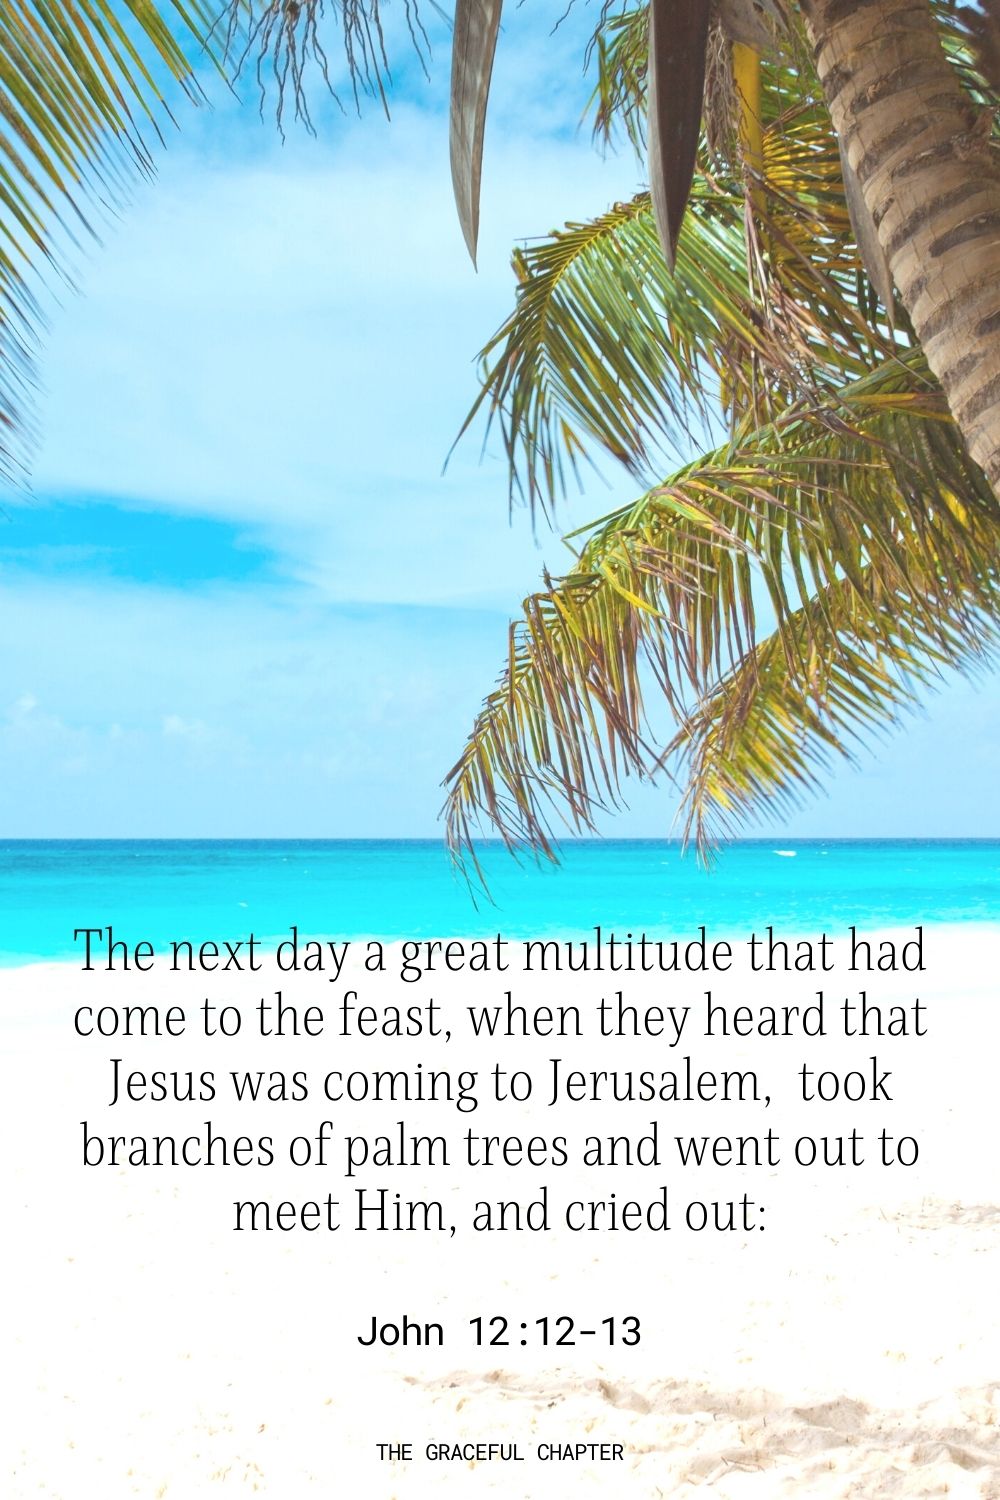 The next day a great multitude that had come to the feast, when they heard that Jesus was coming to Jerusalem,  took branches of palm trees and went out to meet Him, and cried out: John 12:12-13